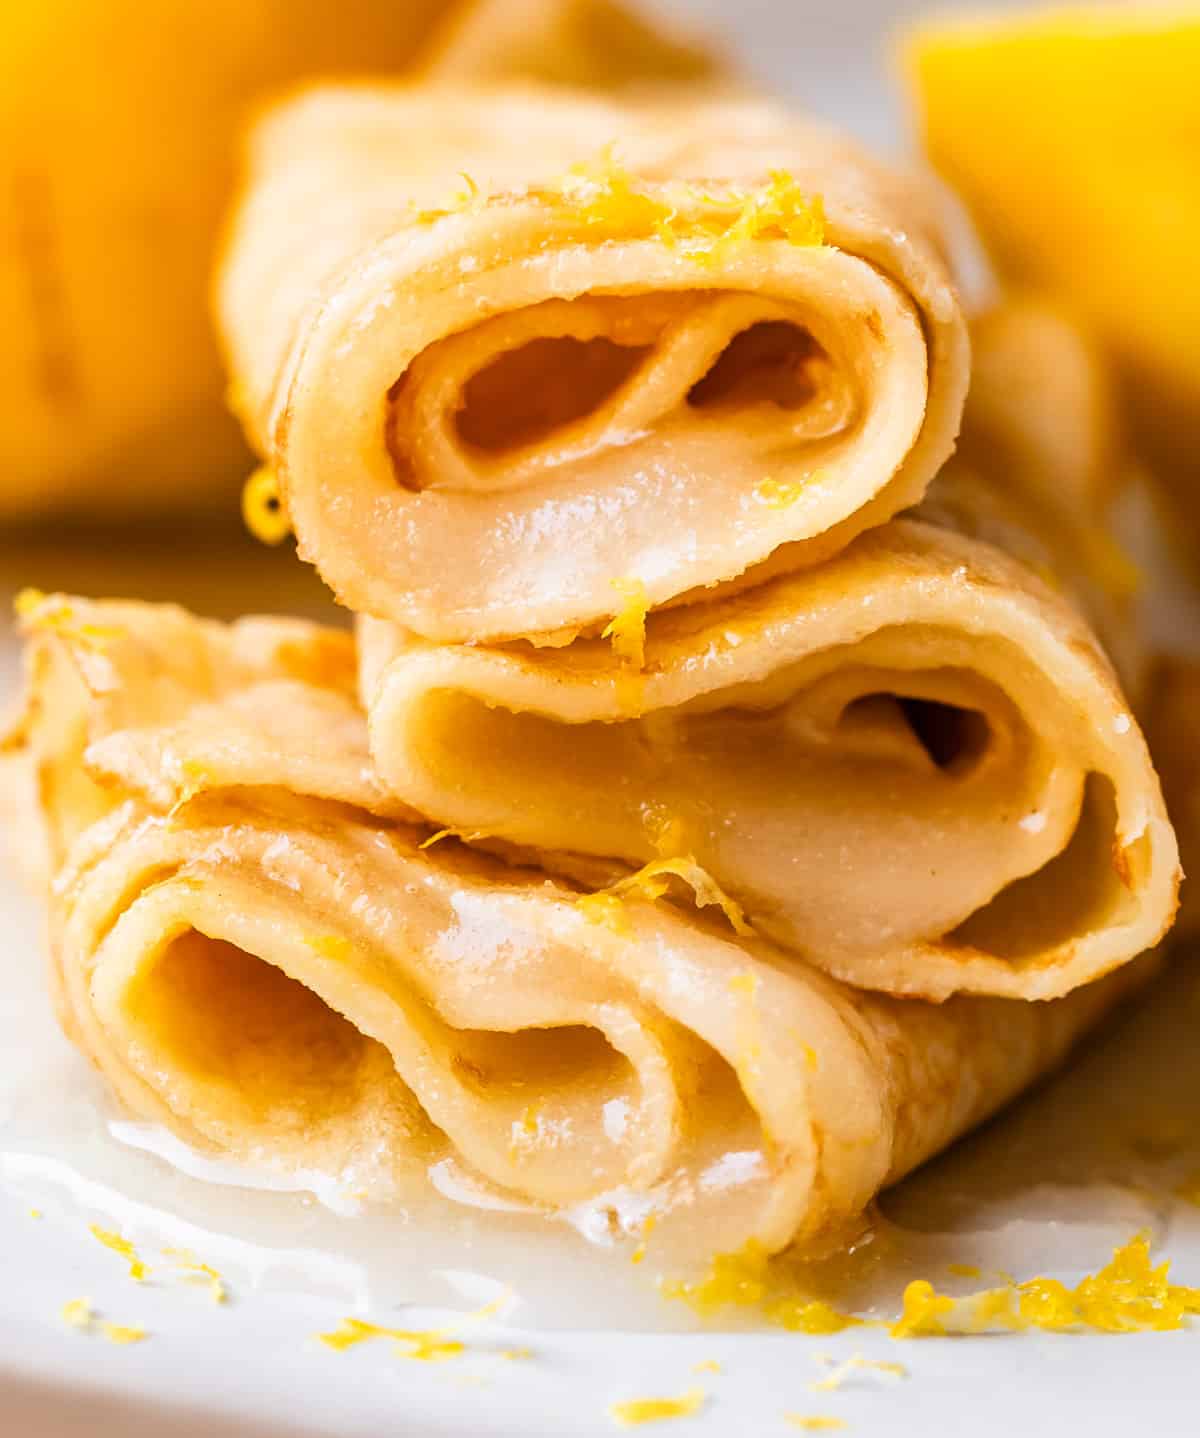 3 rolled up crepes with lemon juice and sugar rolled into each.